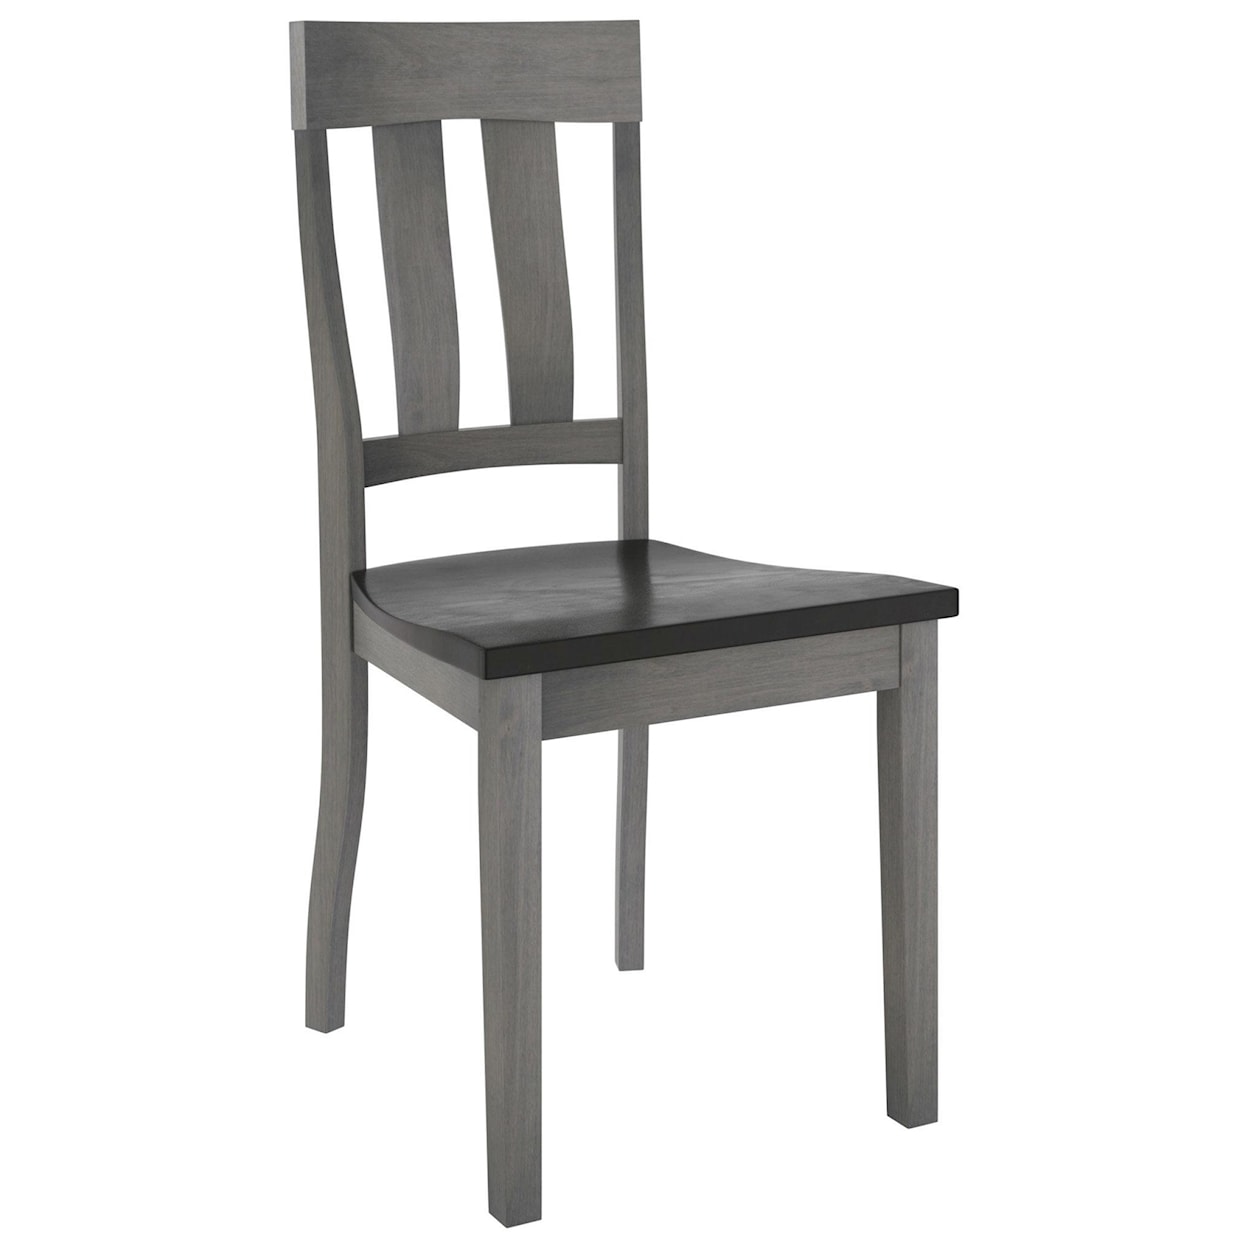 Wengerd Wood Products Parma Side Chair